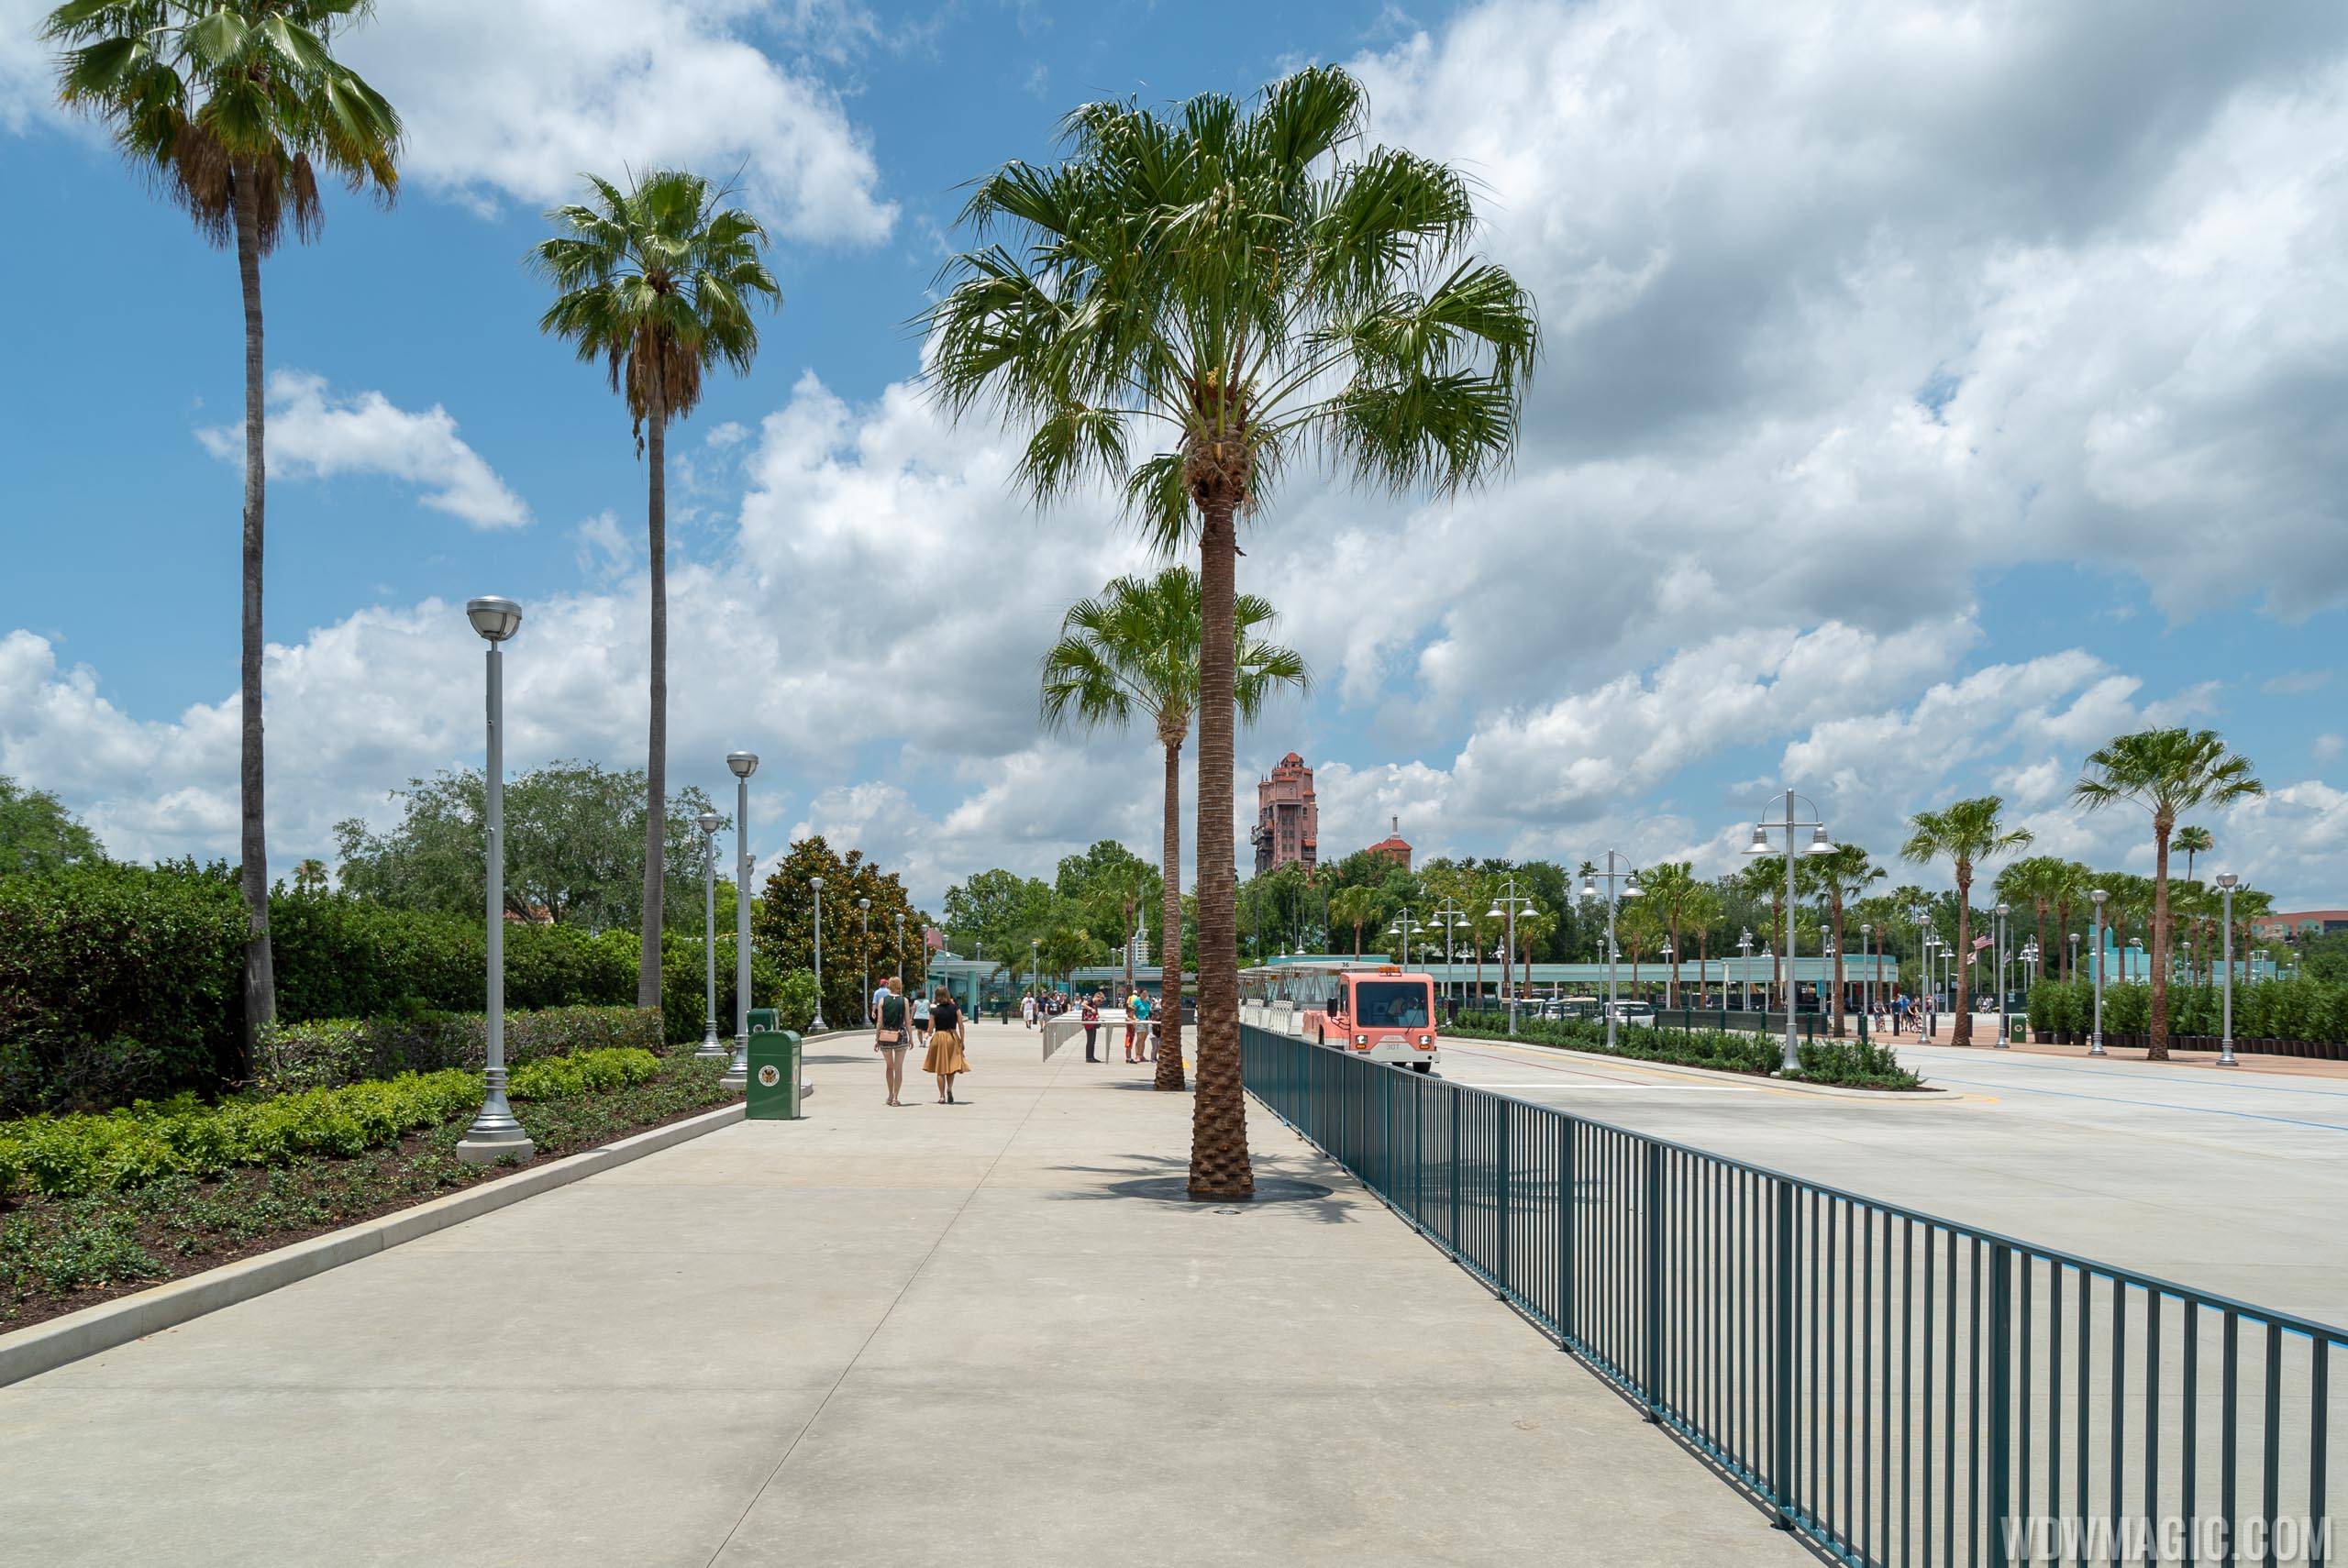 PHOTOS - New tram drop off and bag check opens at Disney's Hollywood Studios